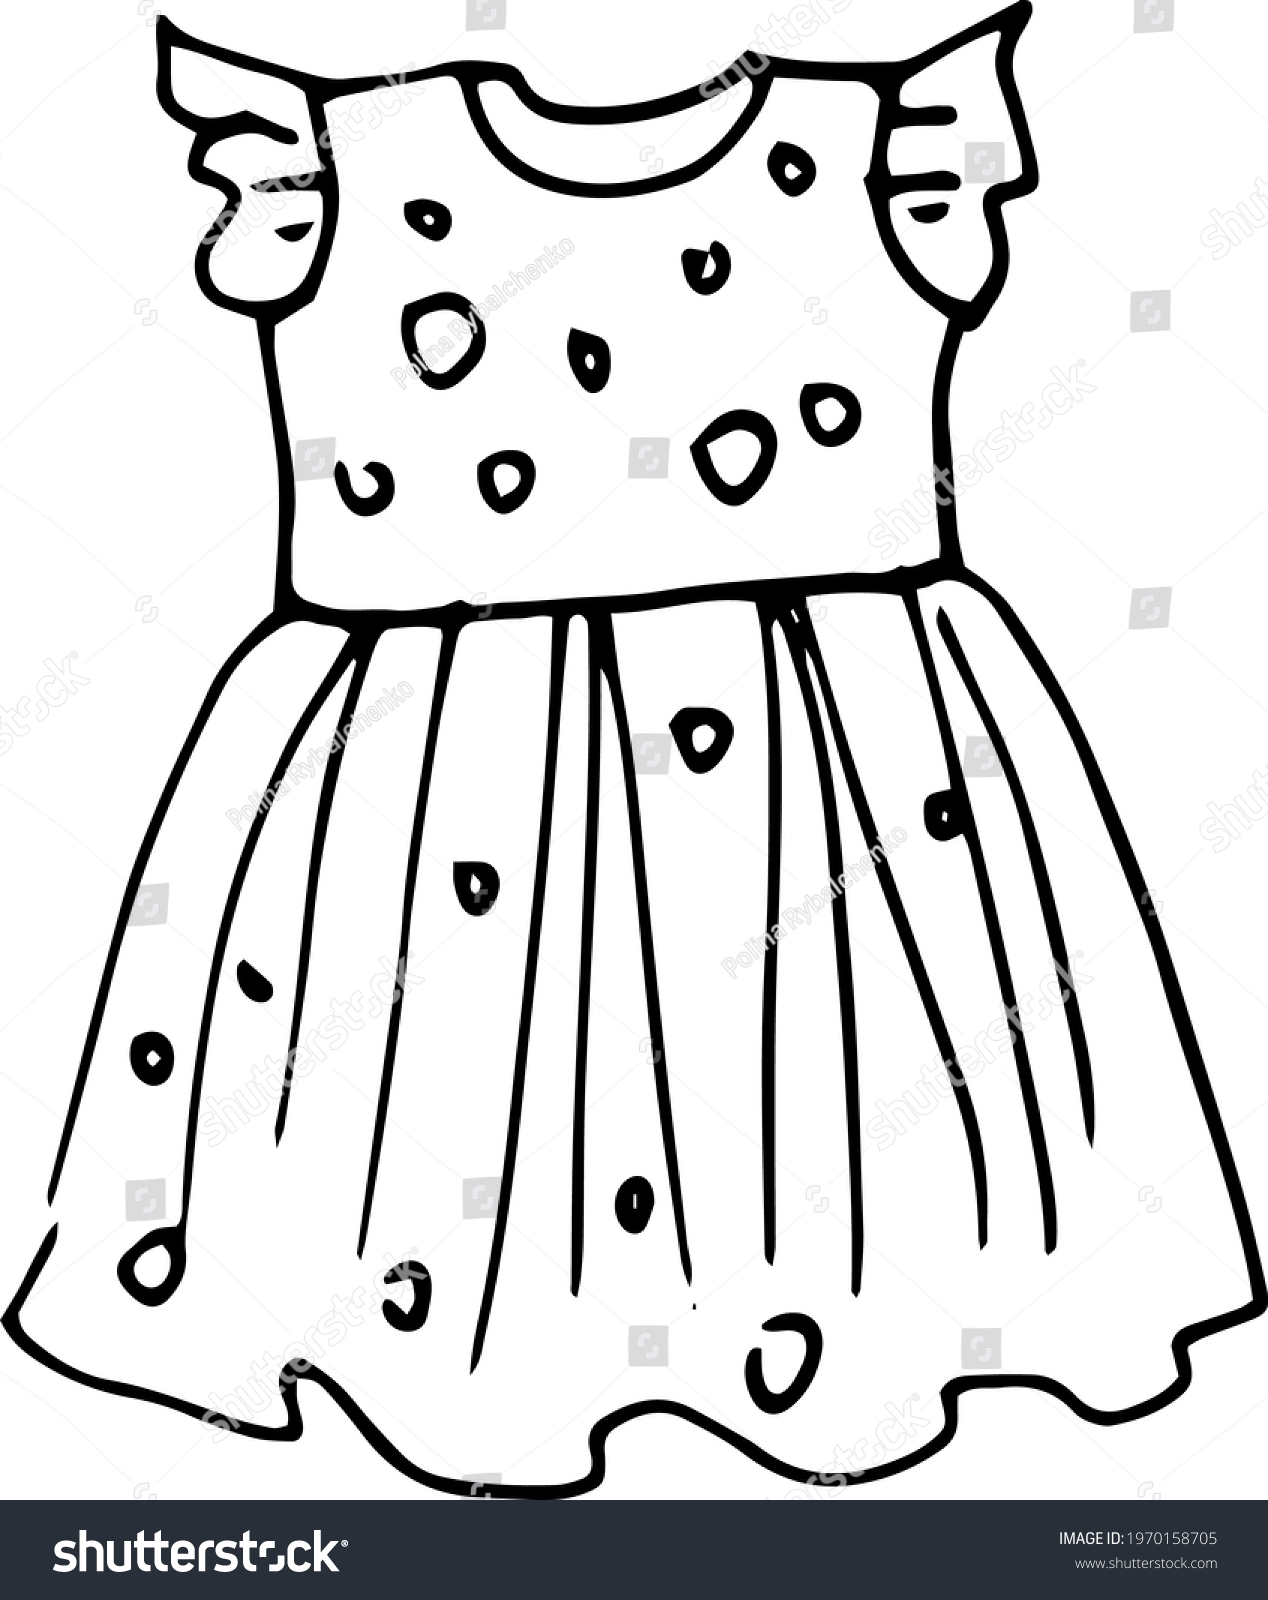 Childrens Dress Doodle Sketch Drawing By Stock Vector (Royalty Free ...